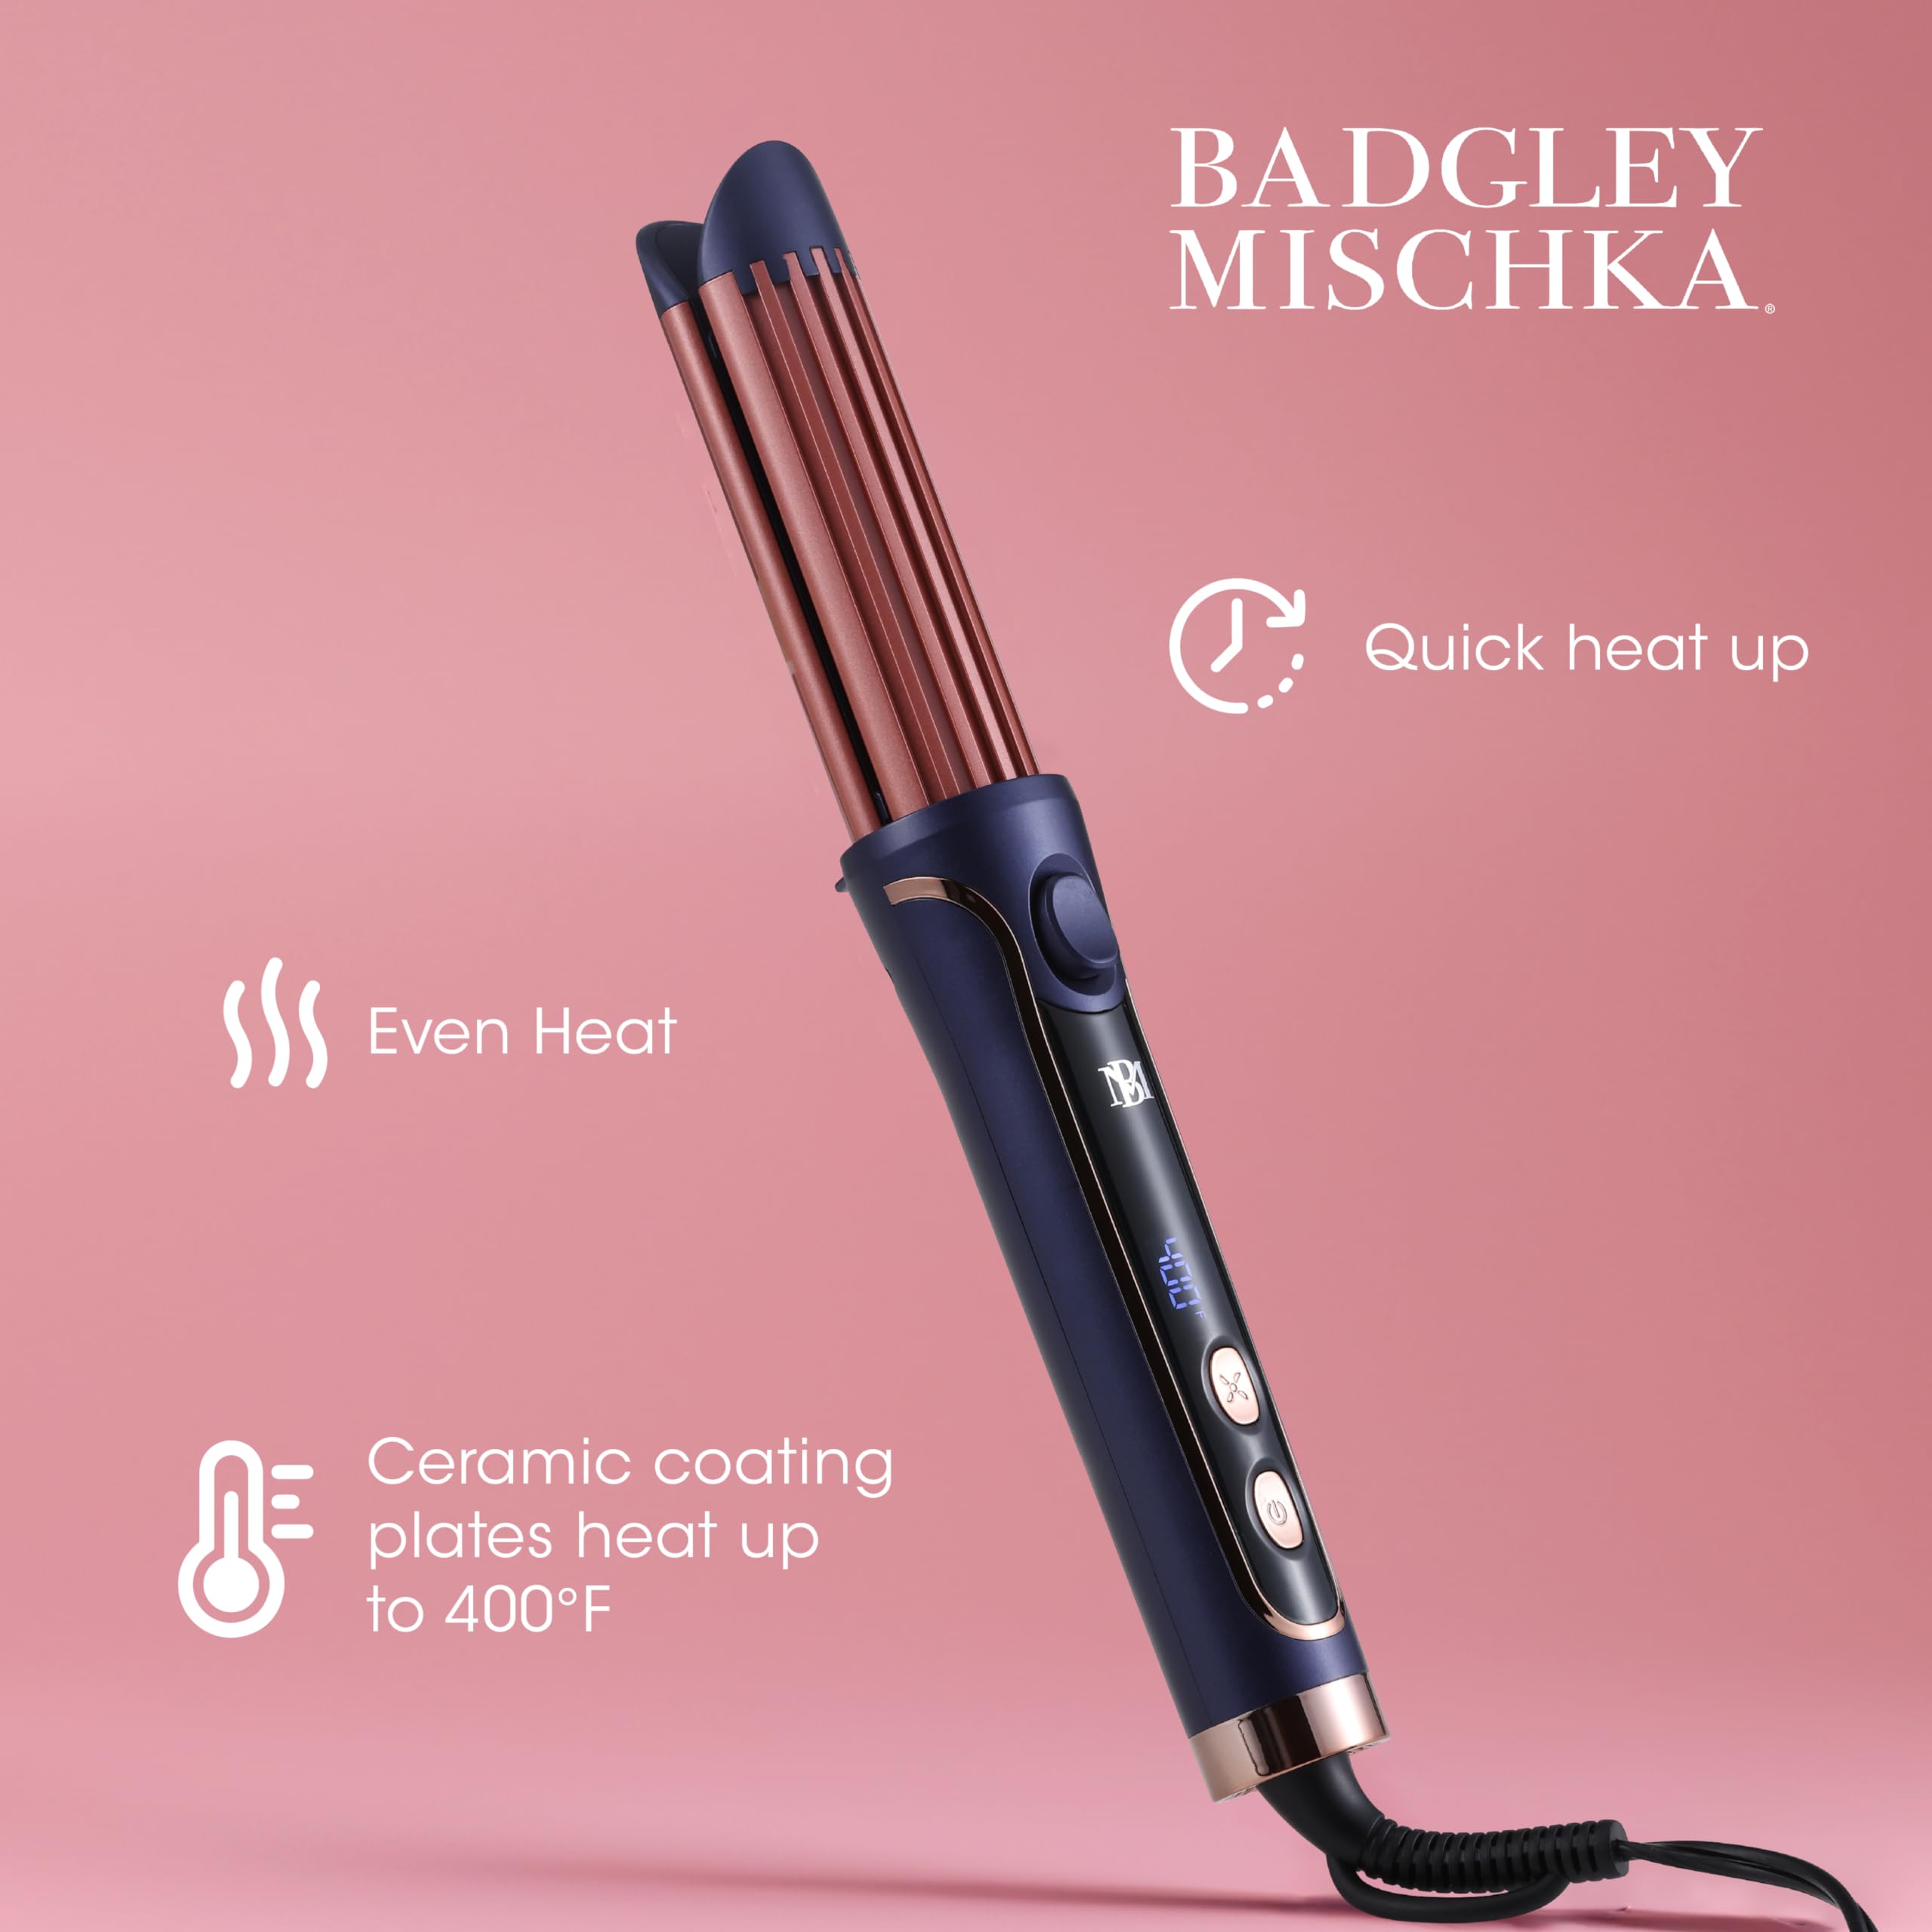 Badgley Mischka 2-in-1 Curling Iron and Hair Straightener Air Styler, Silky Smooth Straight & Bouncy Curls, Ceramic Plates up to 400°F, Digital Display with Heat & Cool Control, Auto Safety Shut Off